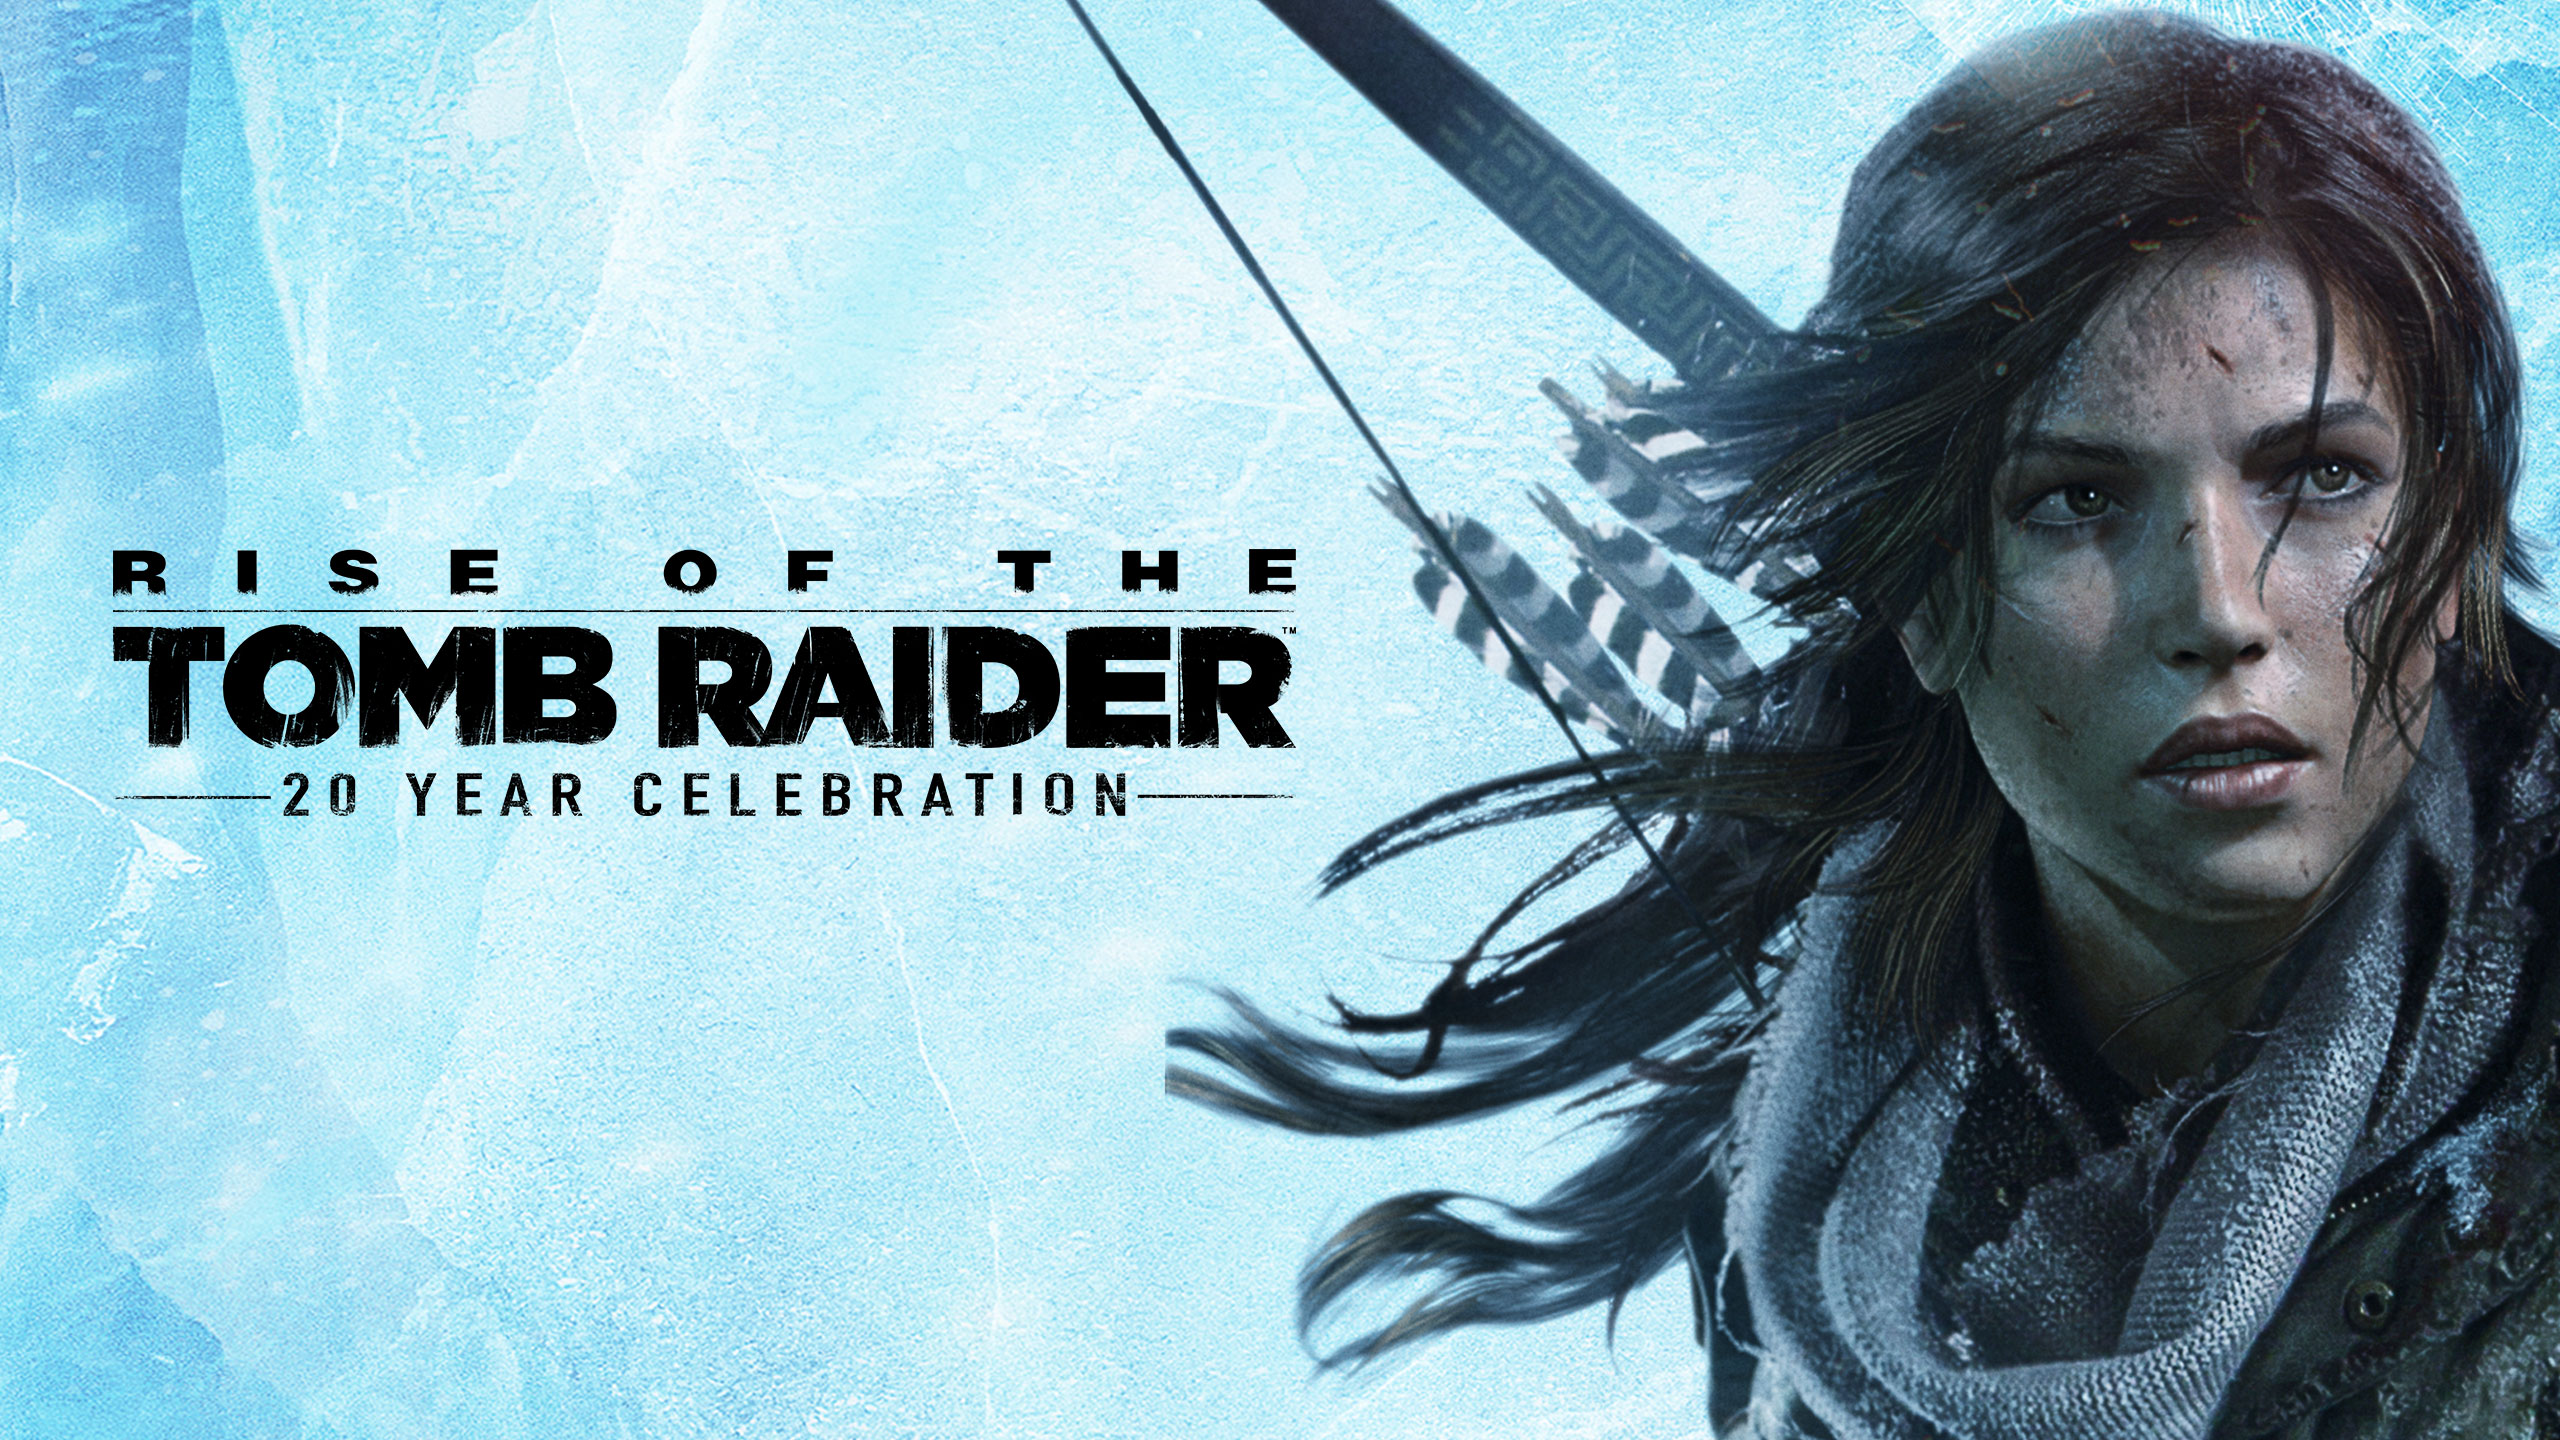 Tomb Raider trilogy for free